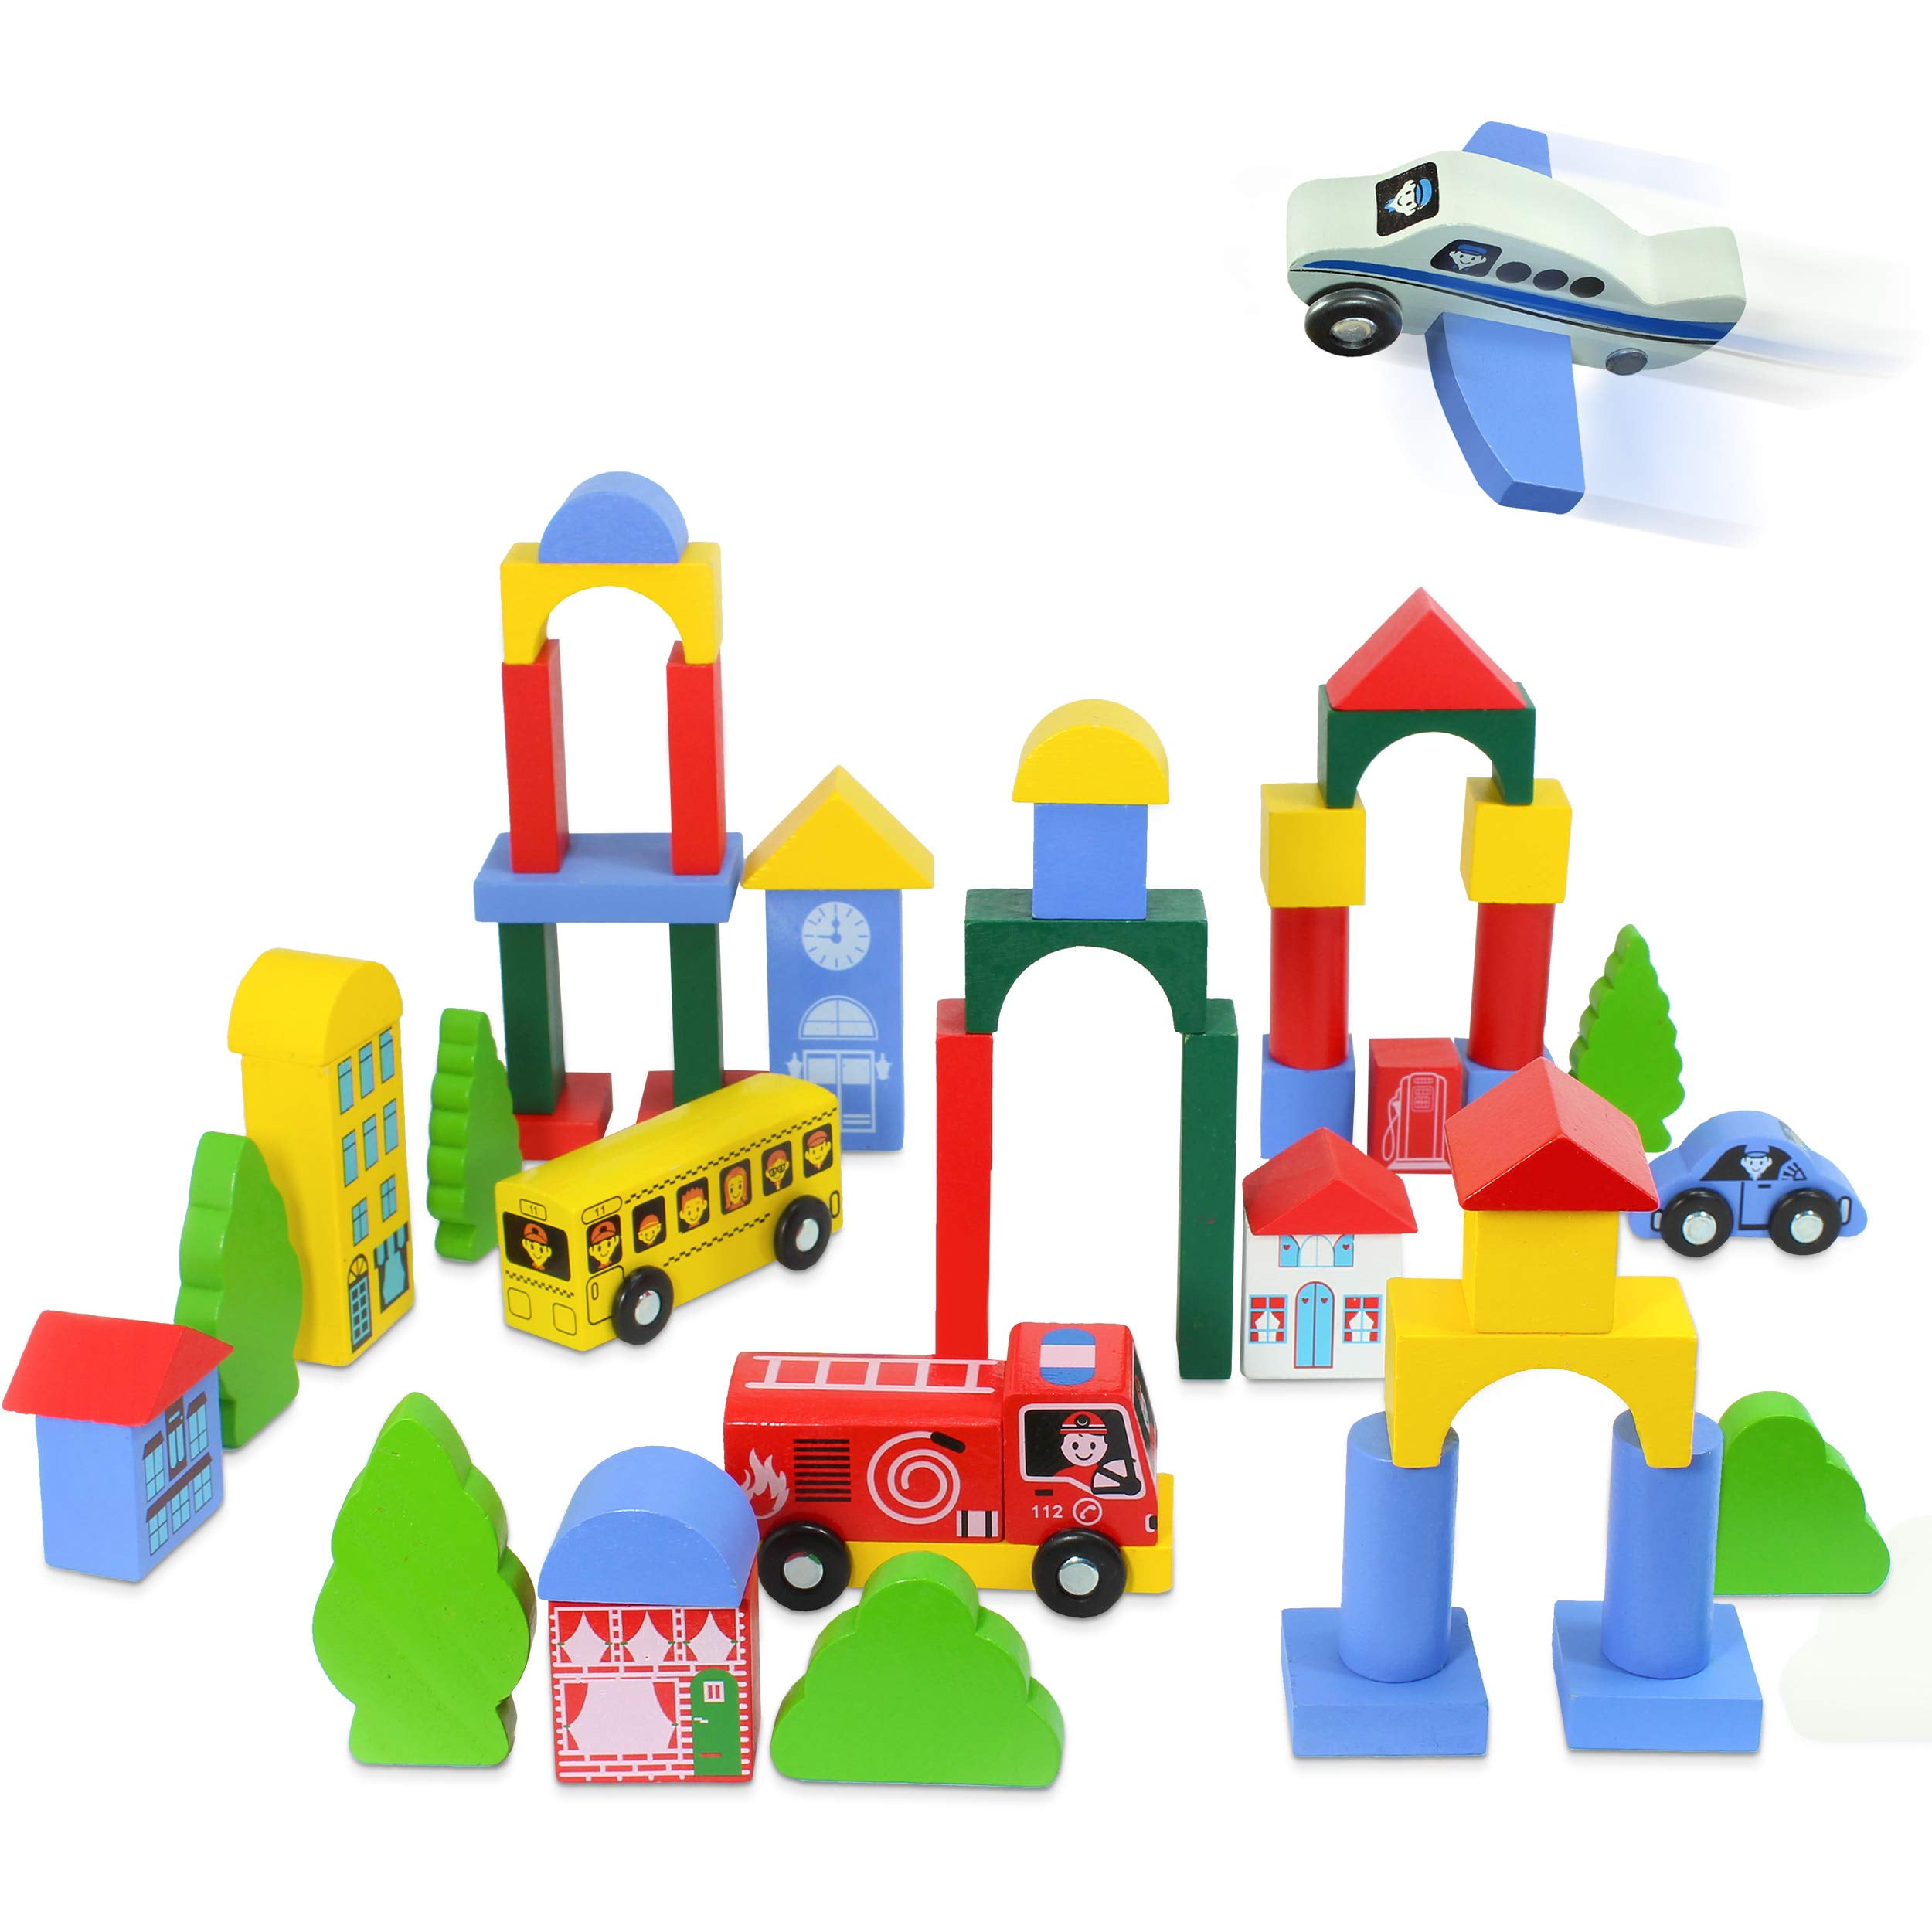 Kidzlane Wooden City Building Blocks - 50 Pc Wood Block Variety Set with  Vehicles, Houses & Trees in Storage Bucket - Brightly Painted, Safe &  Non-Toxic for Toddlers & Kids 